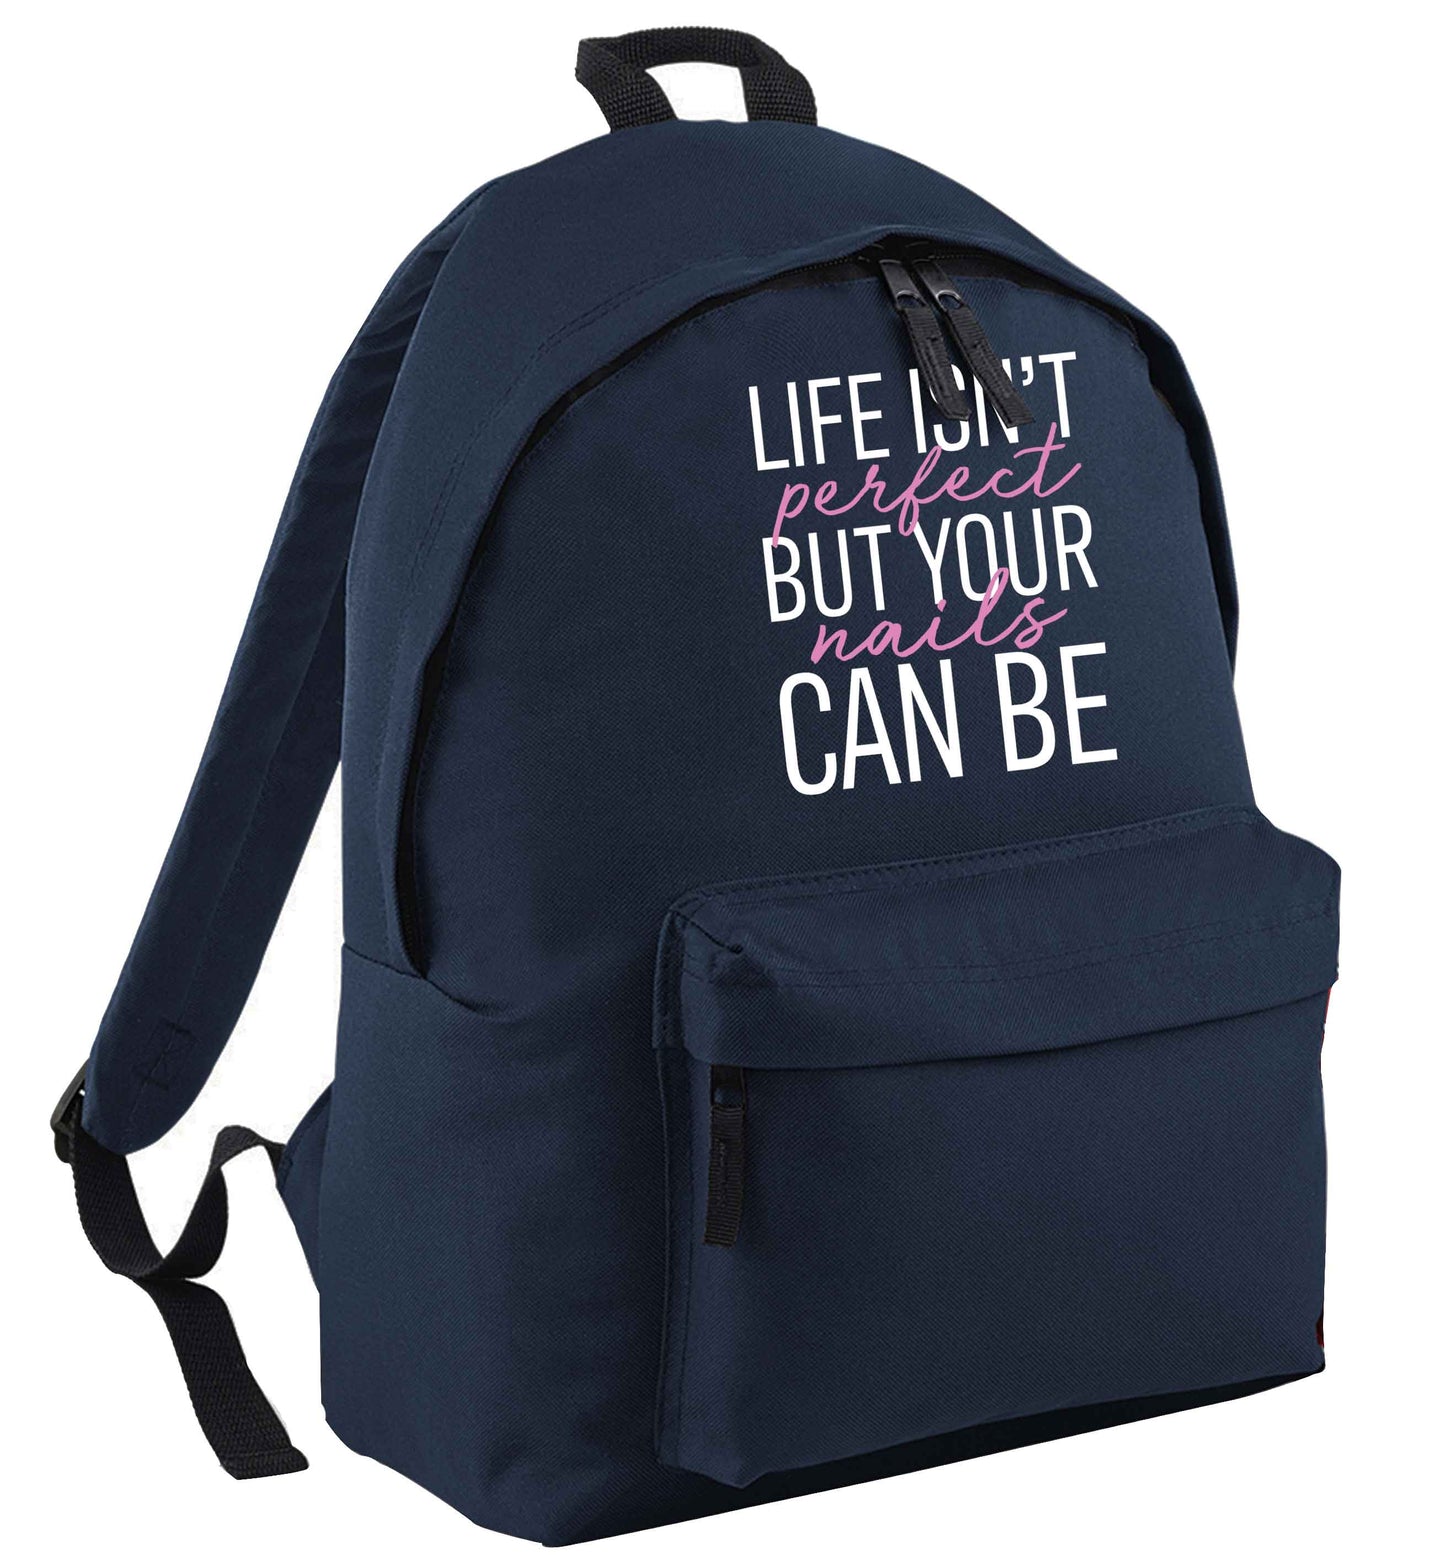 Life isn't perfect but your nails can be | Children's backpack